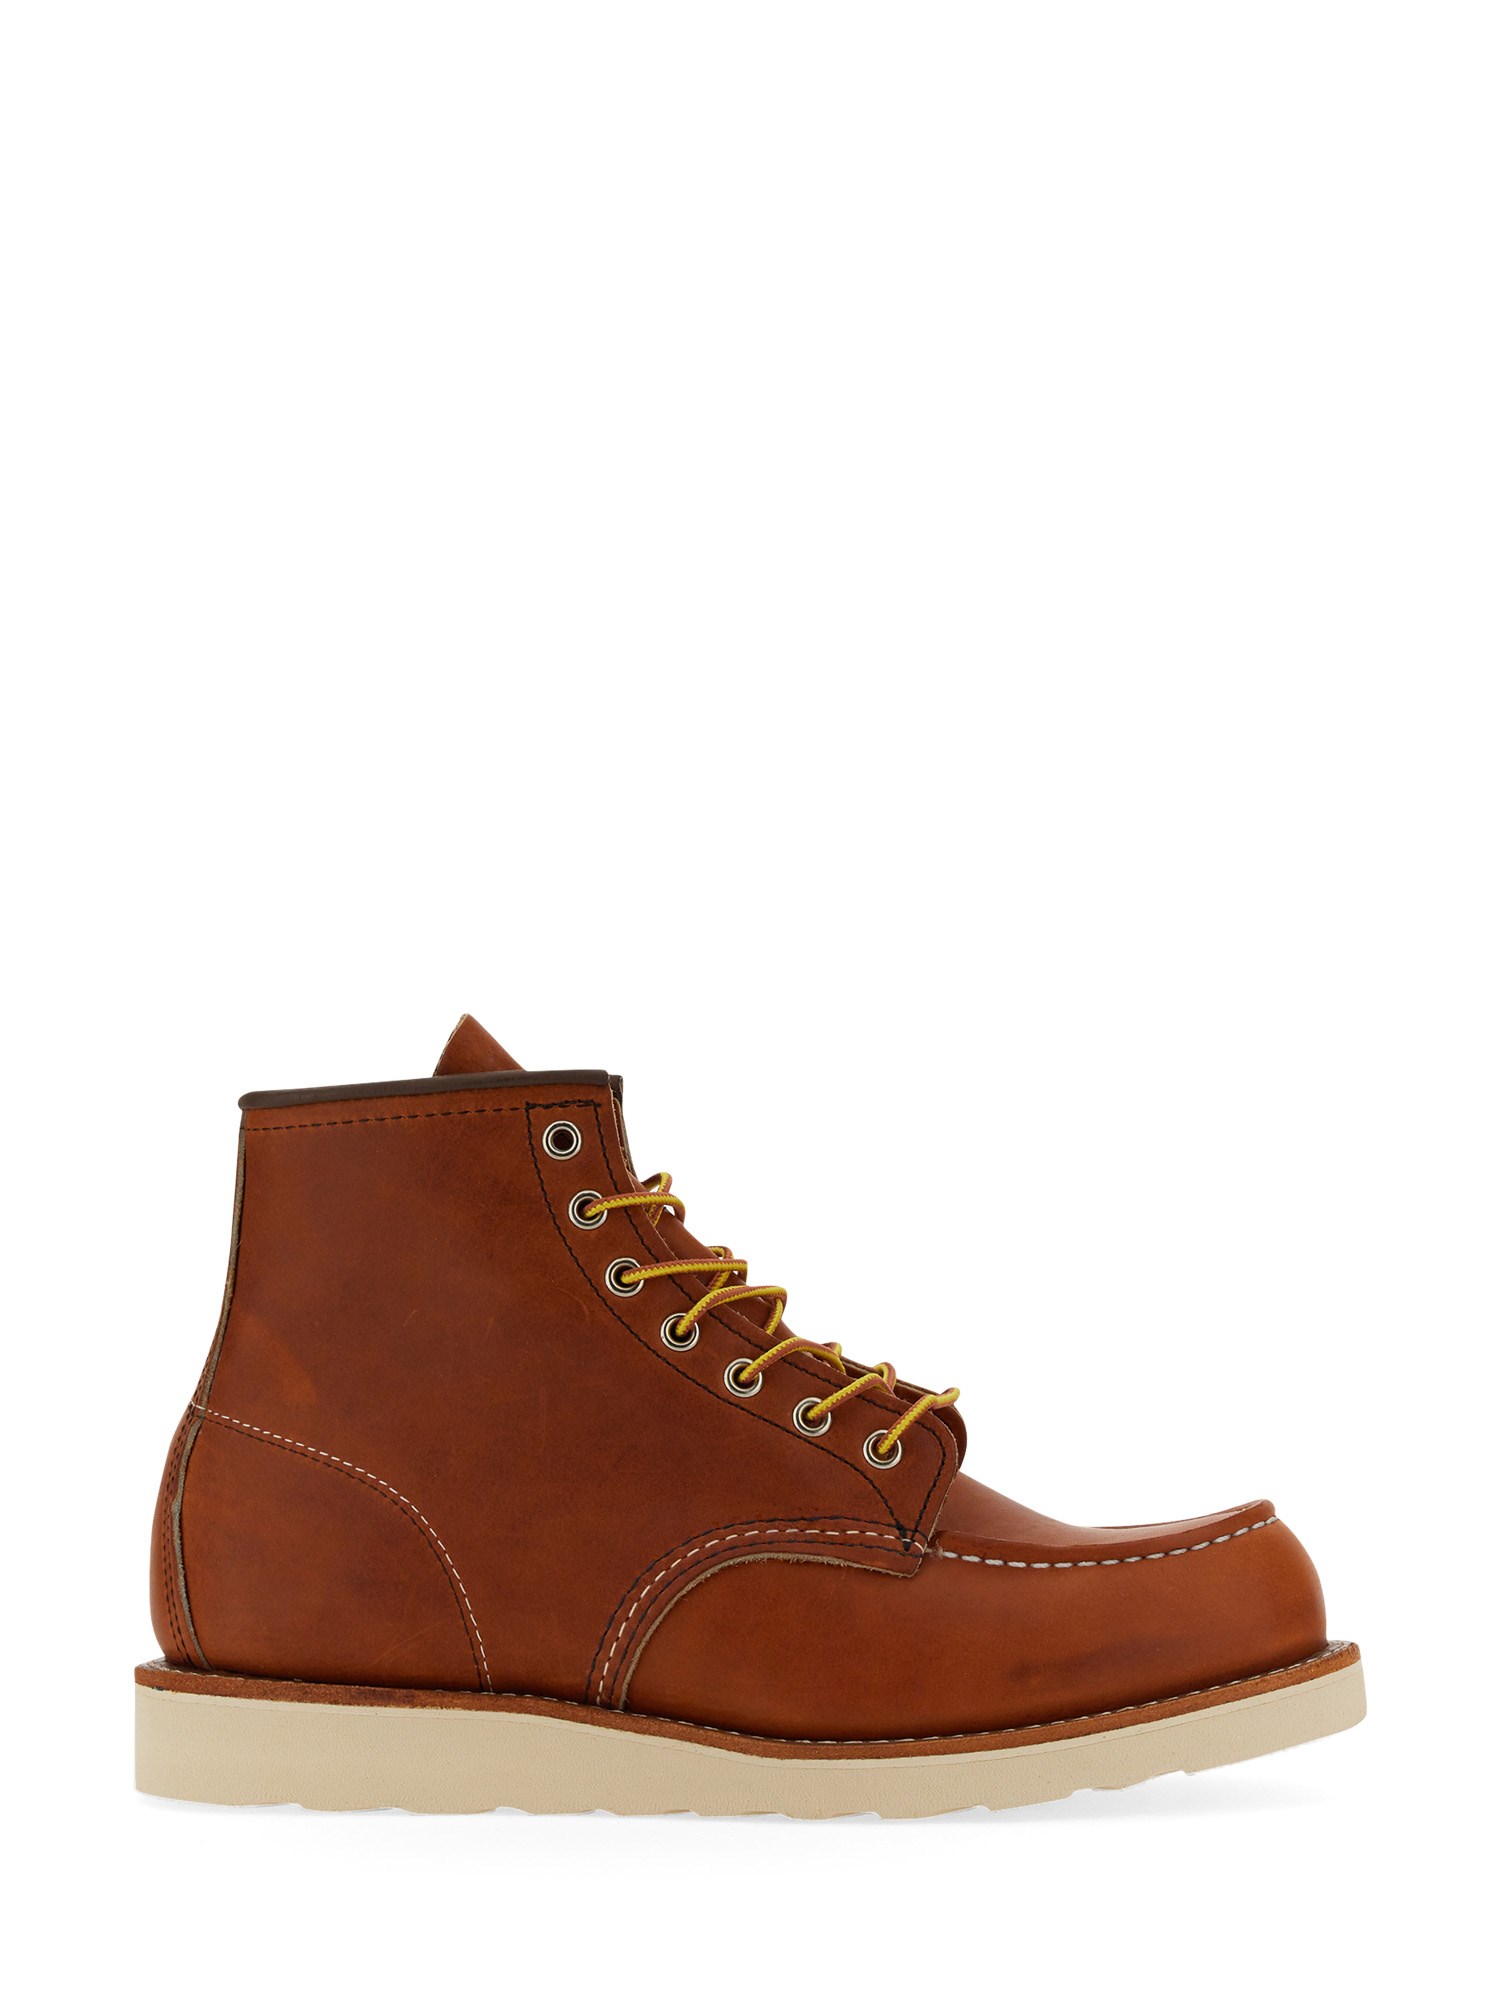 RED WING MOC TOE LACE-UP BOOTS